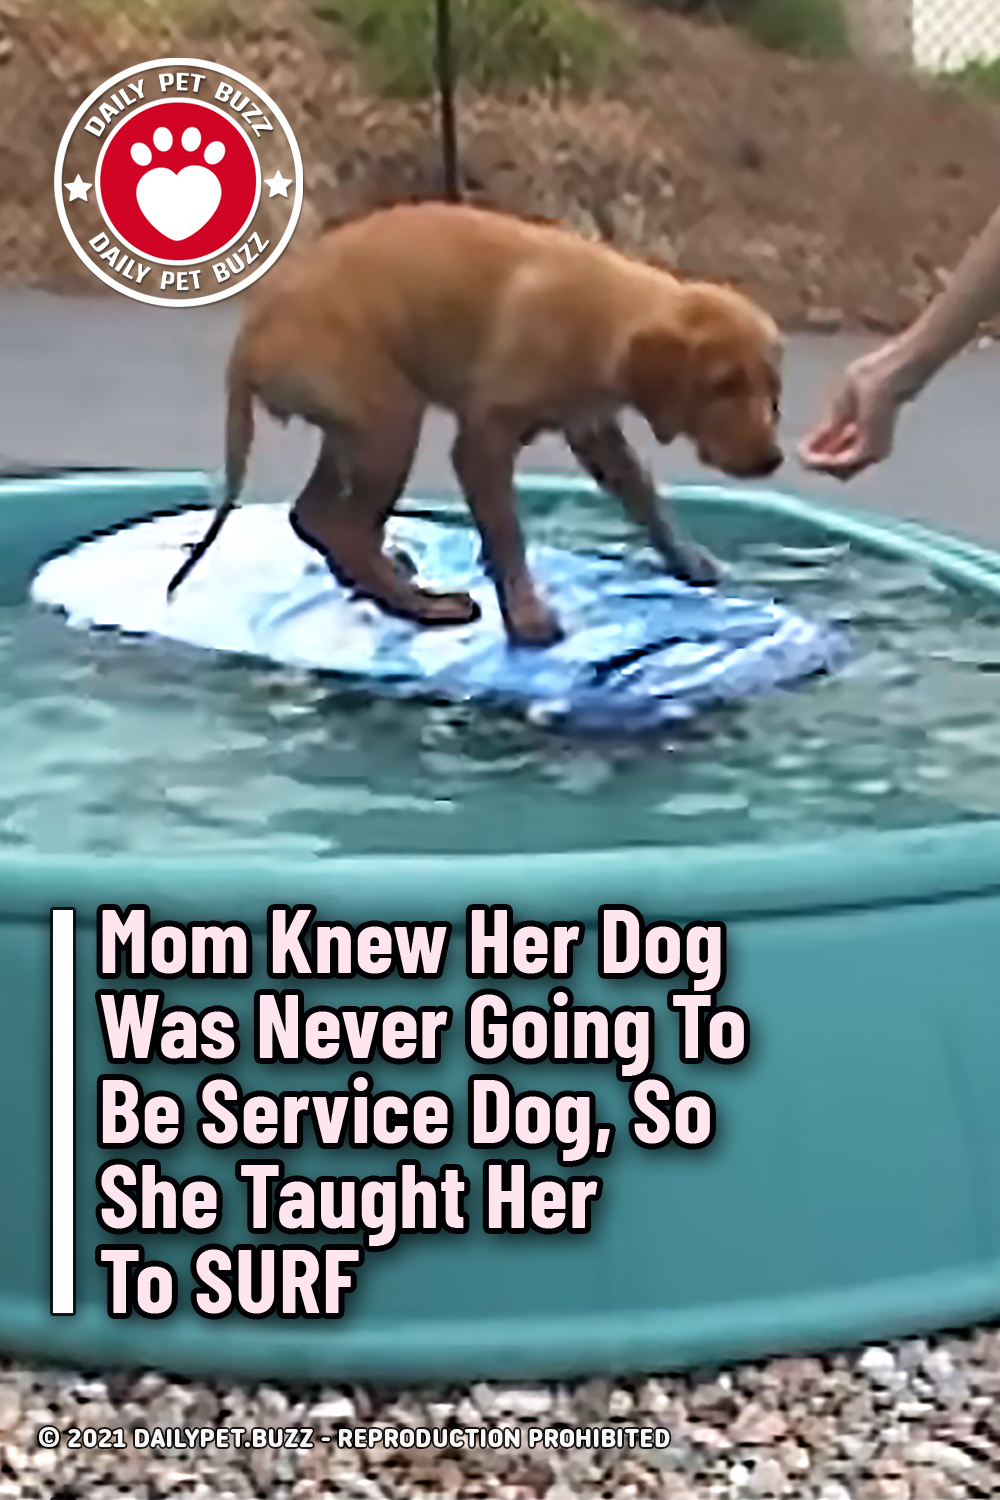 Mom Knew Her Dog Was Never Going To Be Service Dog, So She Taught Her To SURF